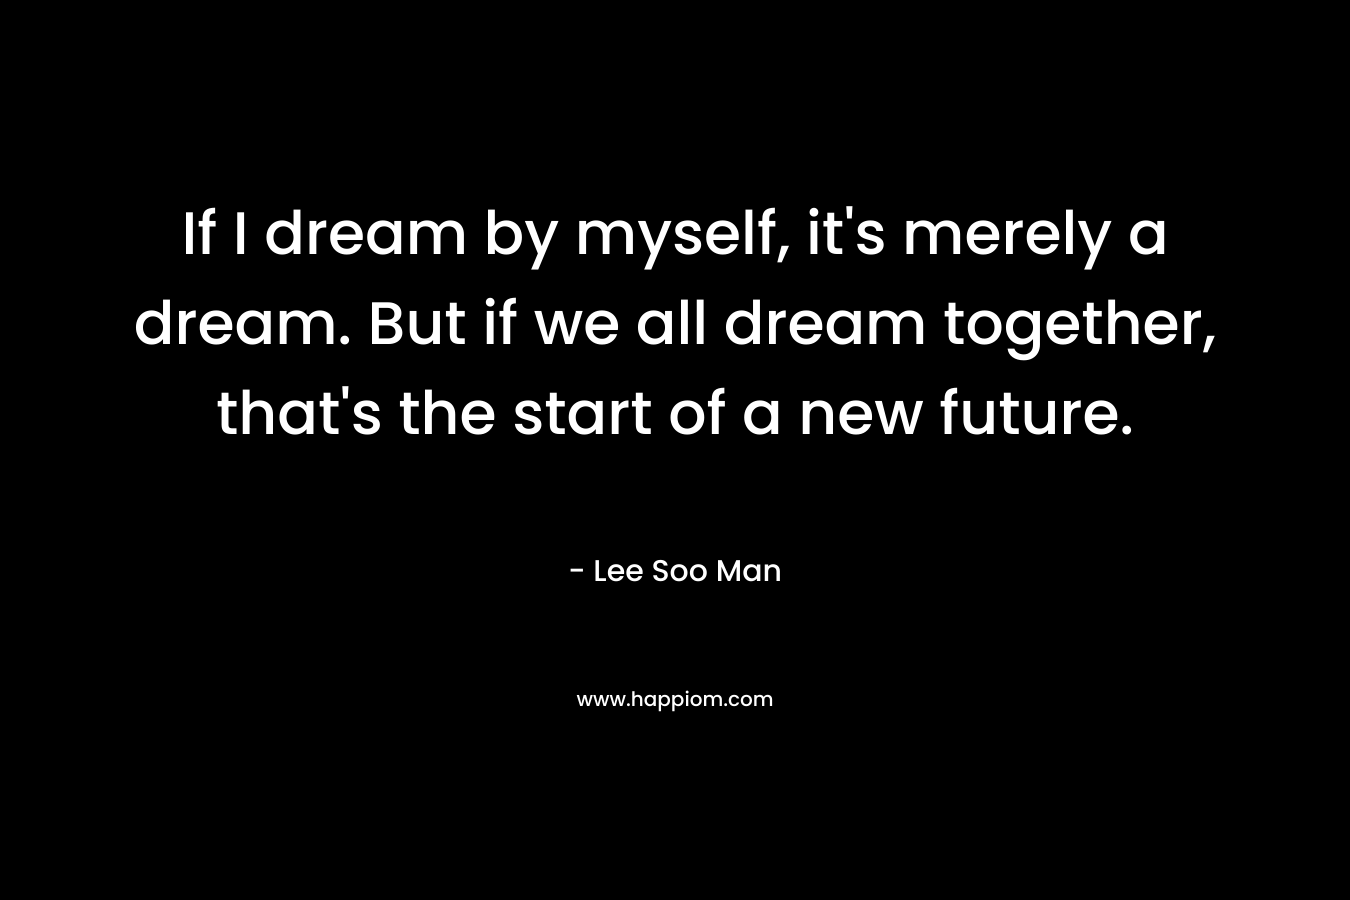 If I dream by myself, it's merely a dream. But if we all dream together, that's the start of a new future.